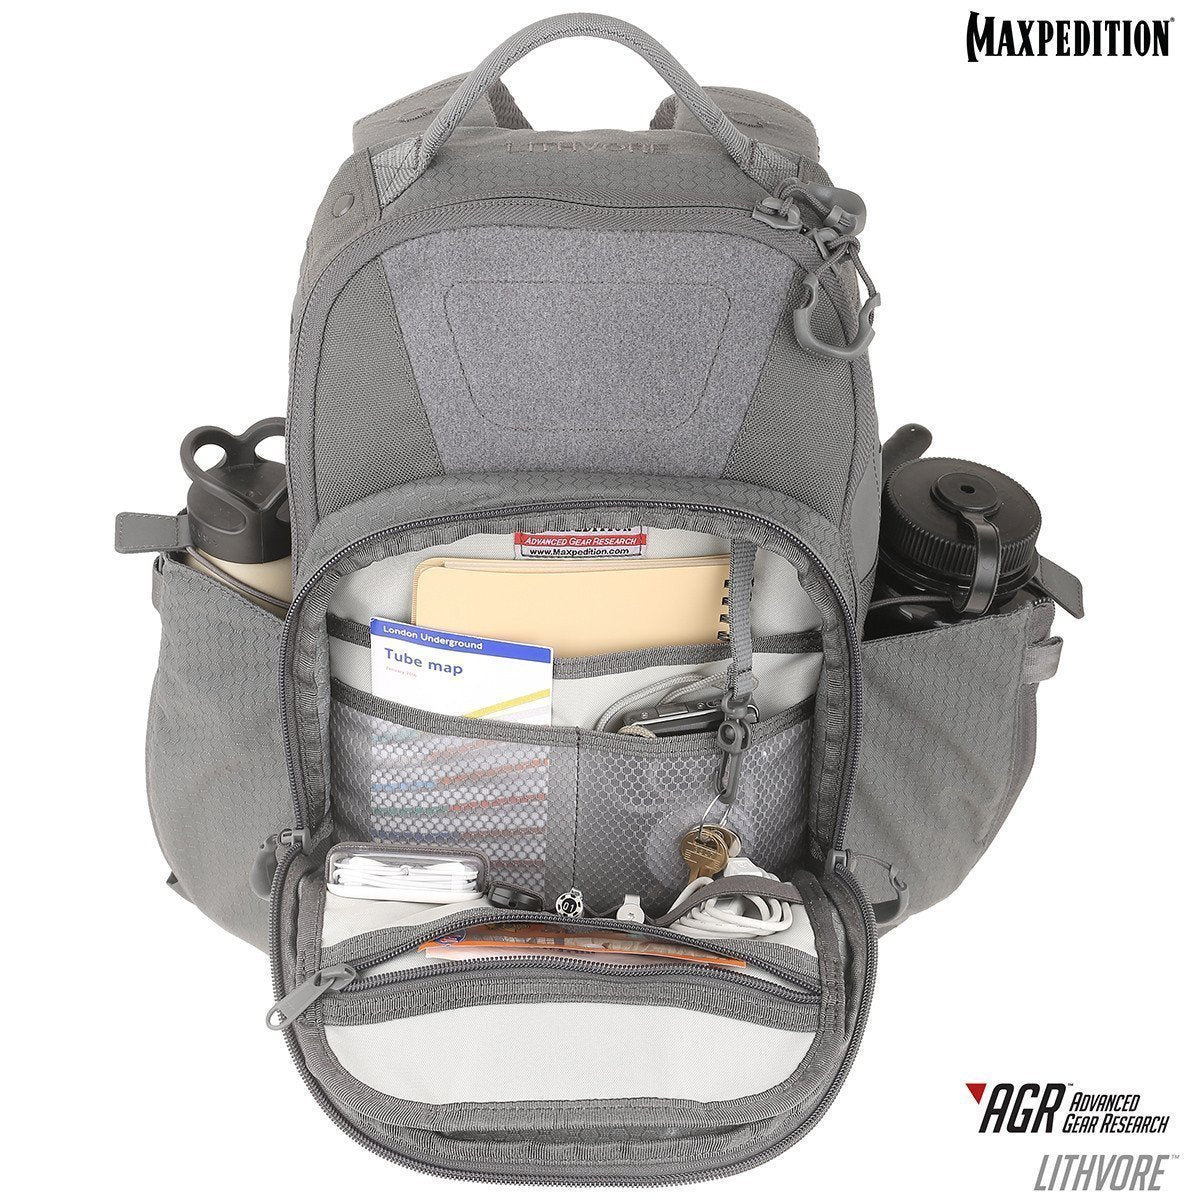 Maxpedition Lithvore Everyday Backpack 17L Backpacks Maxpedition Tactical Gear Supplier Tactical Distributors Australia